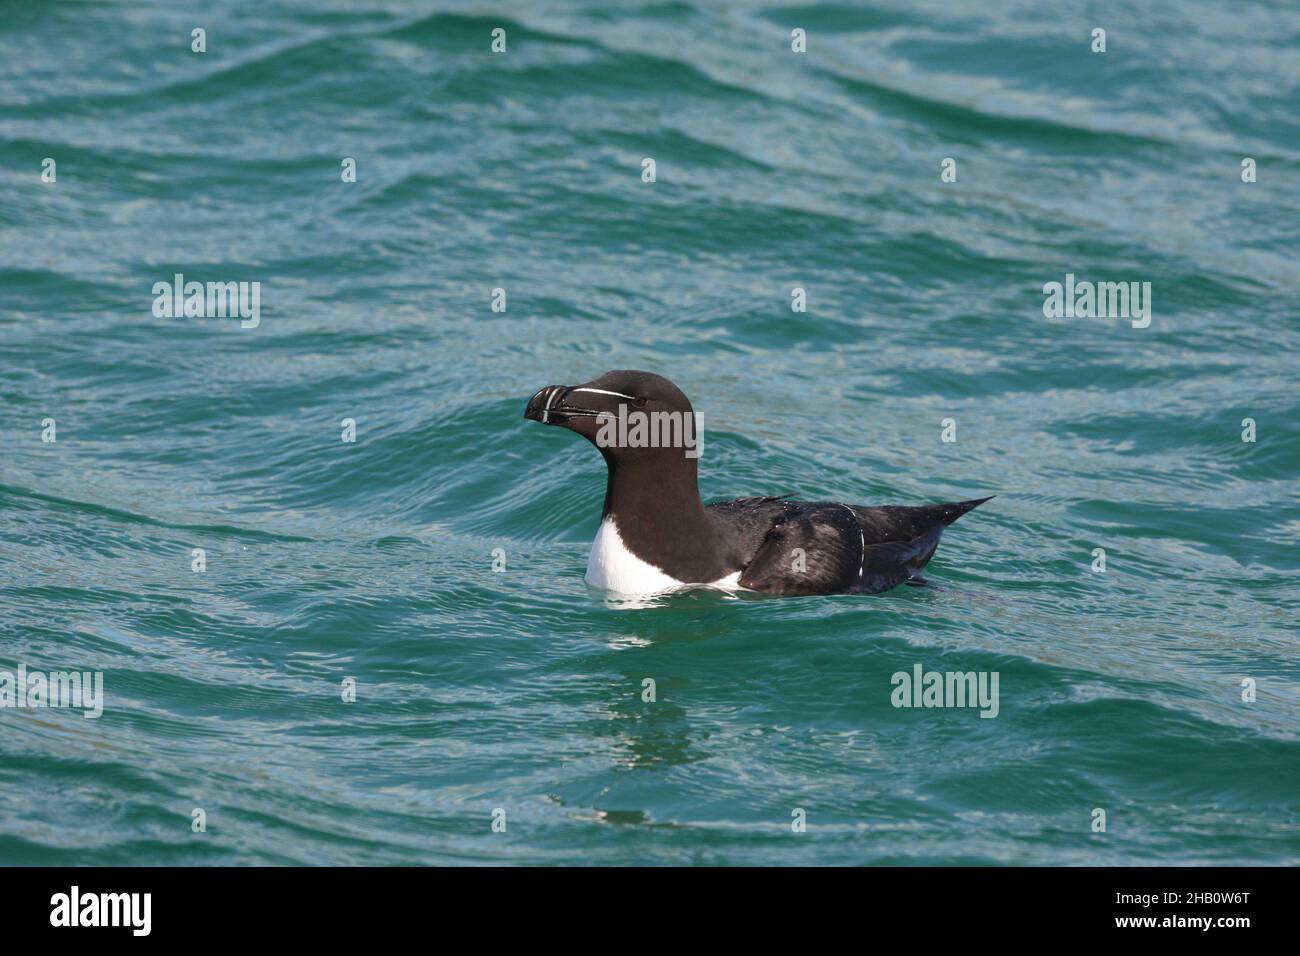 Razorbill in shallow coastal waters during breeding season where they catch fish prey to feed their chick. Stock Photo